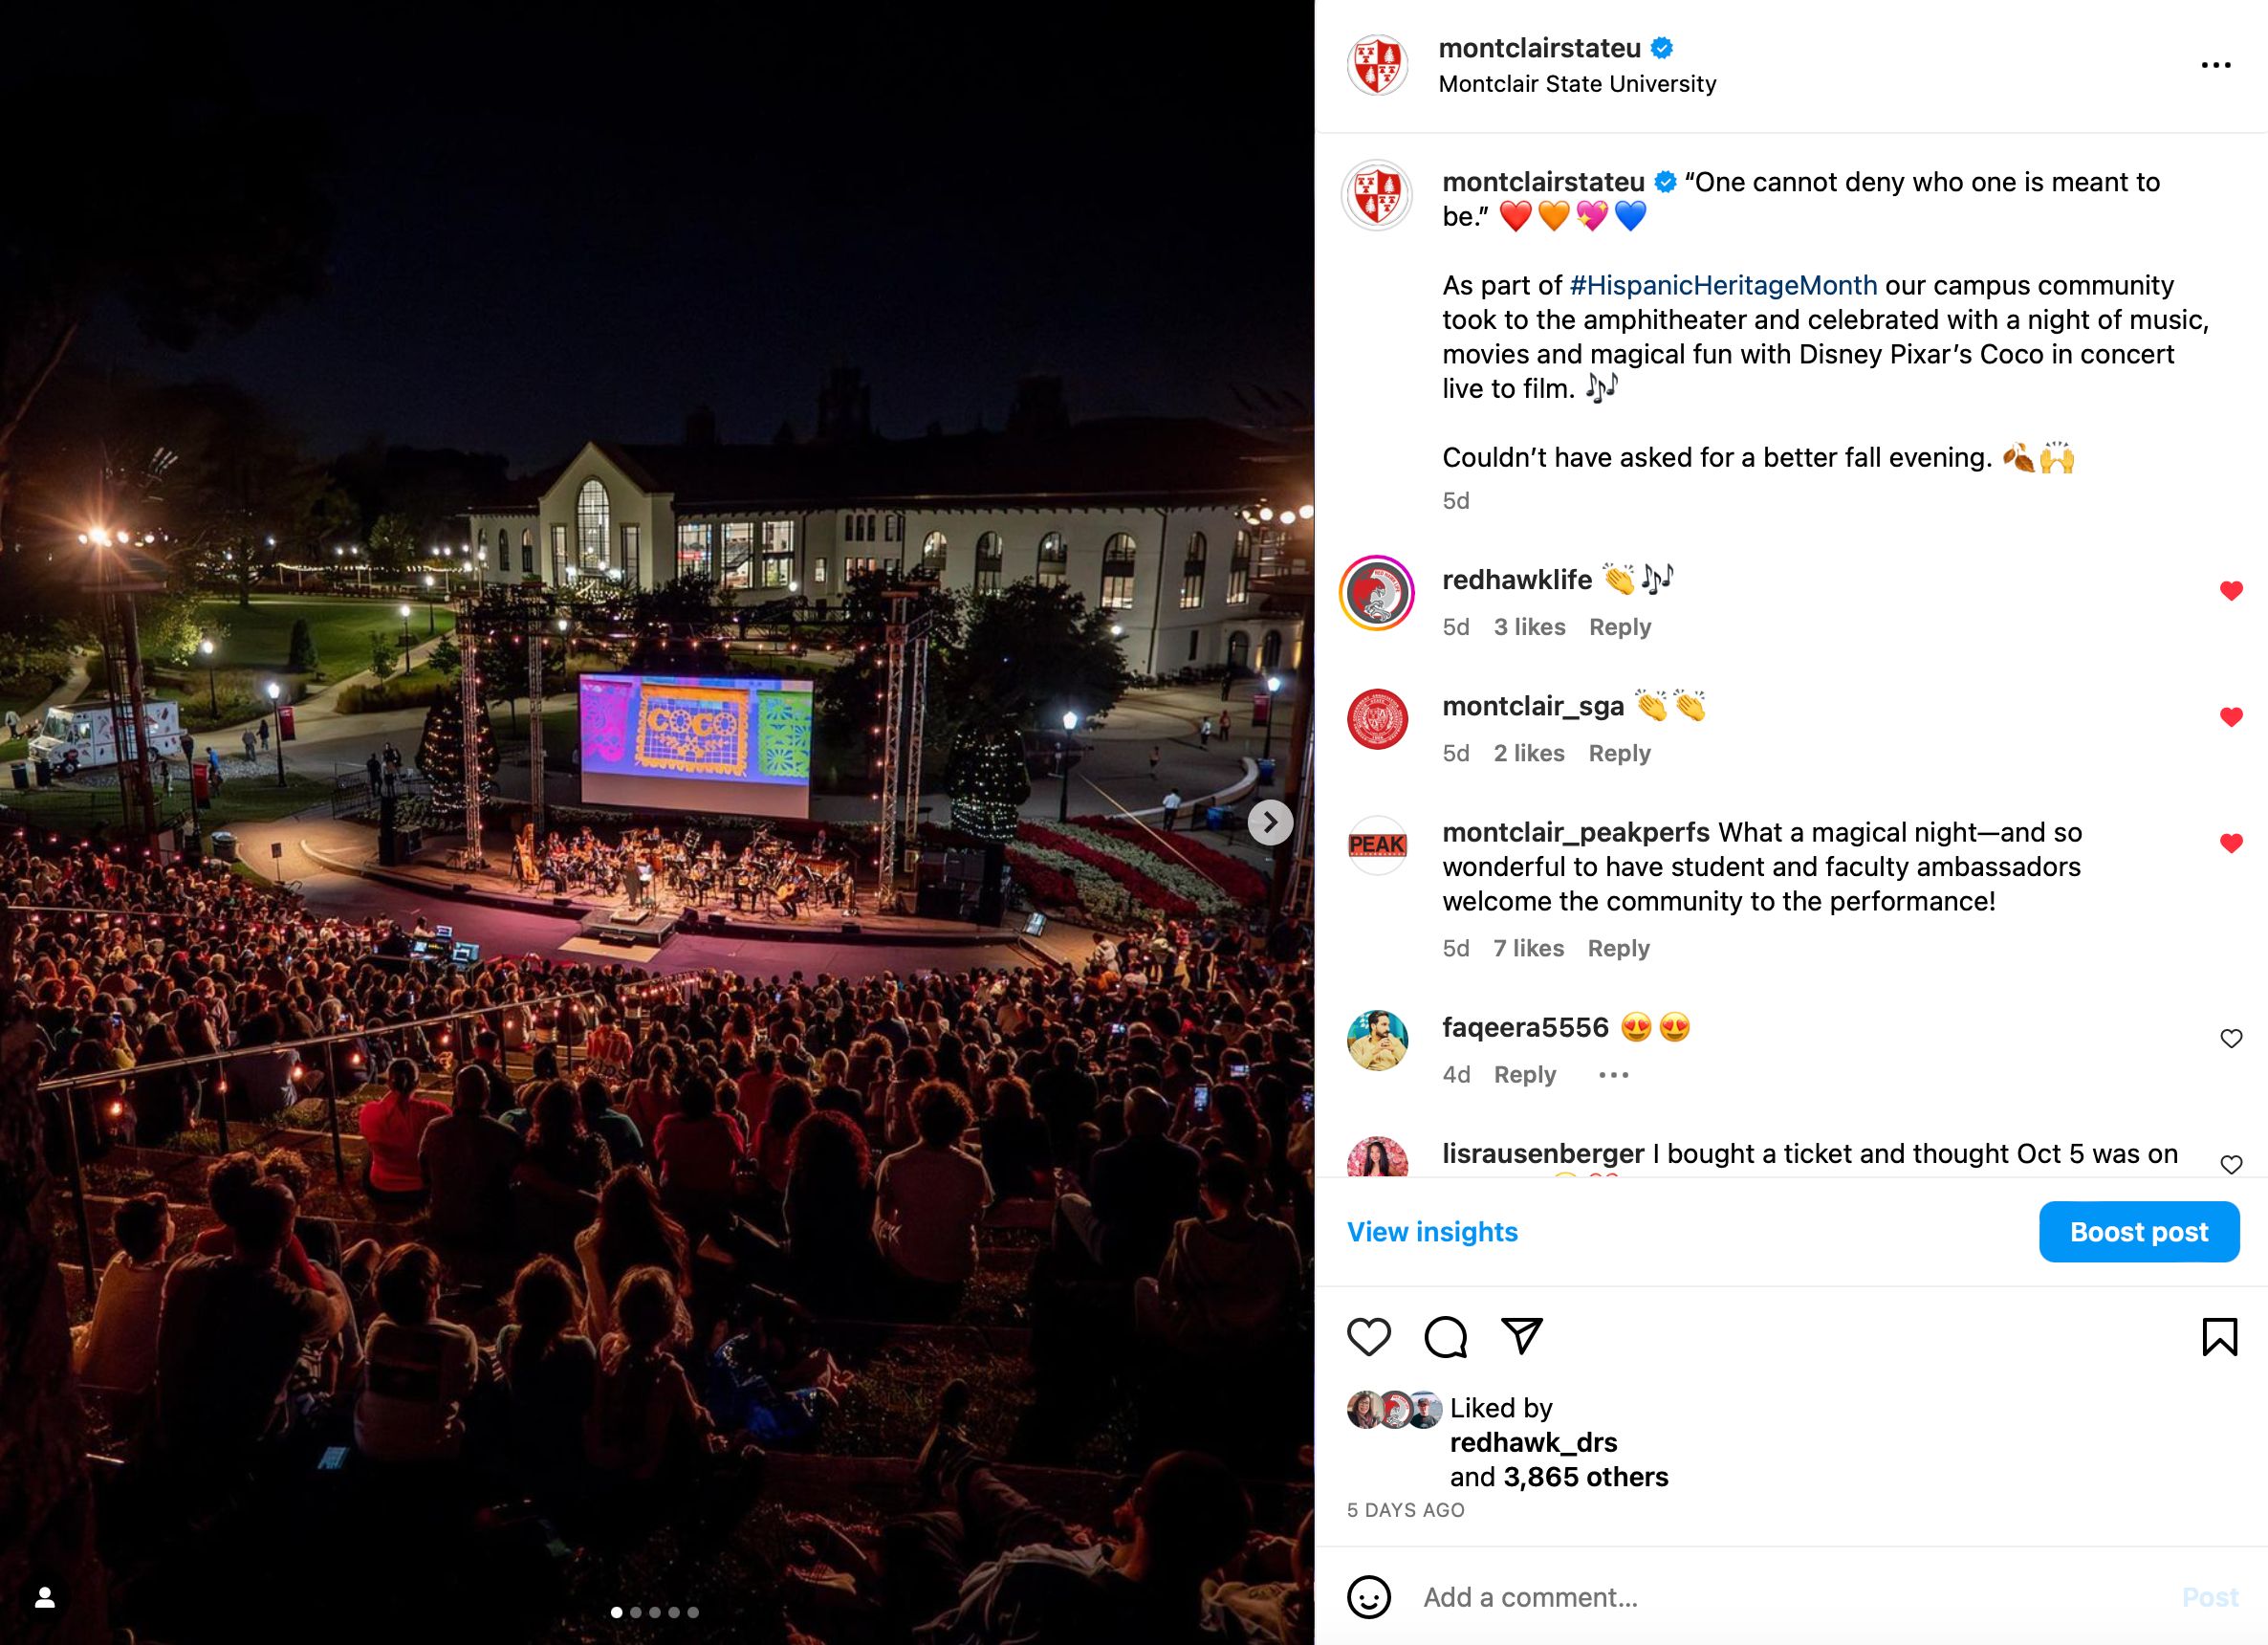 Photo of students watching orchestra in amphitheater at night presented as instagram post